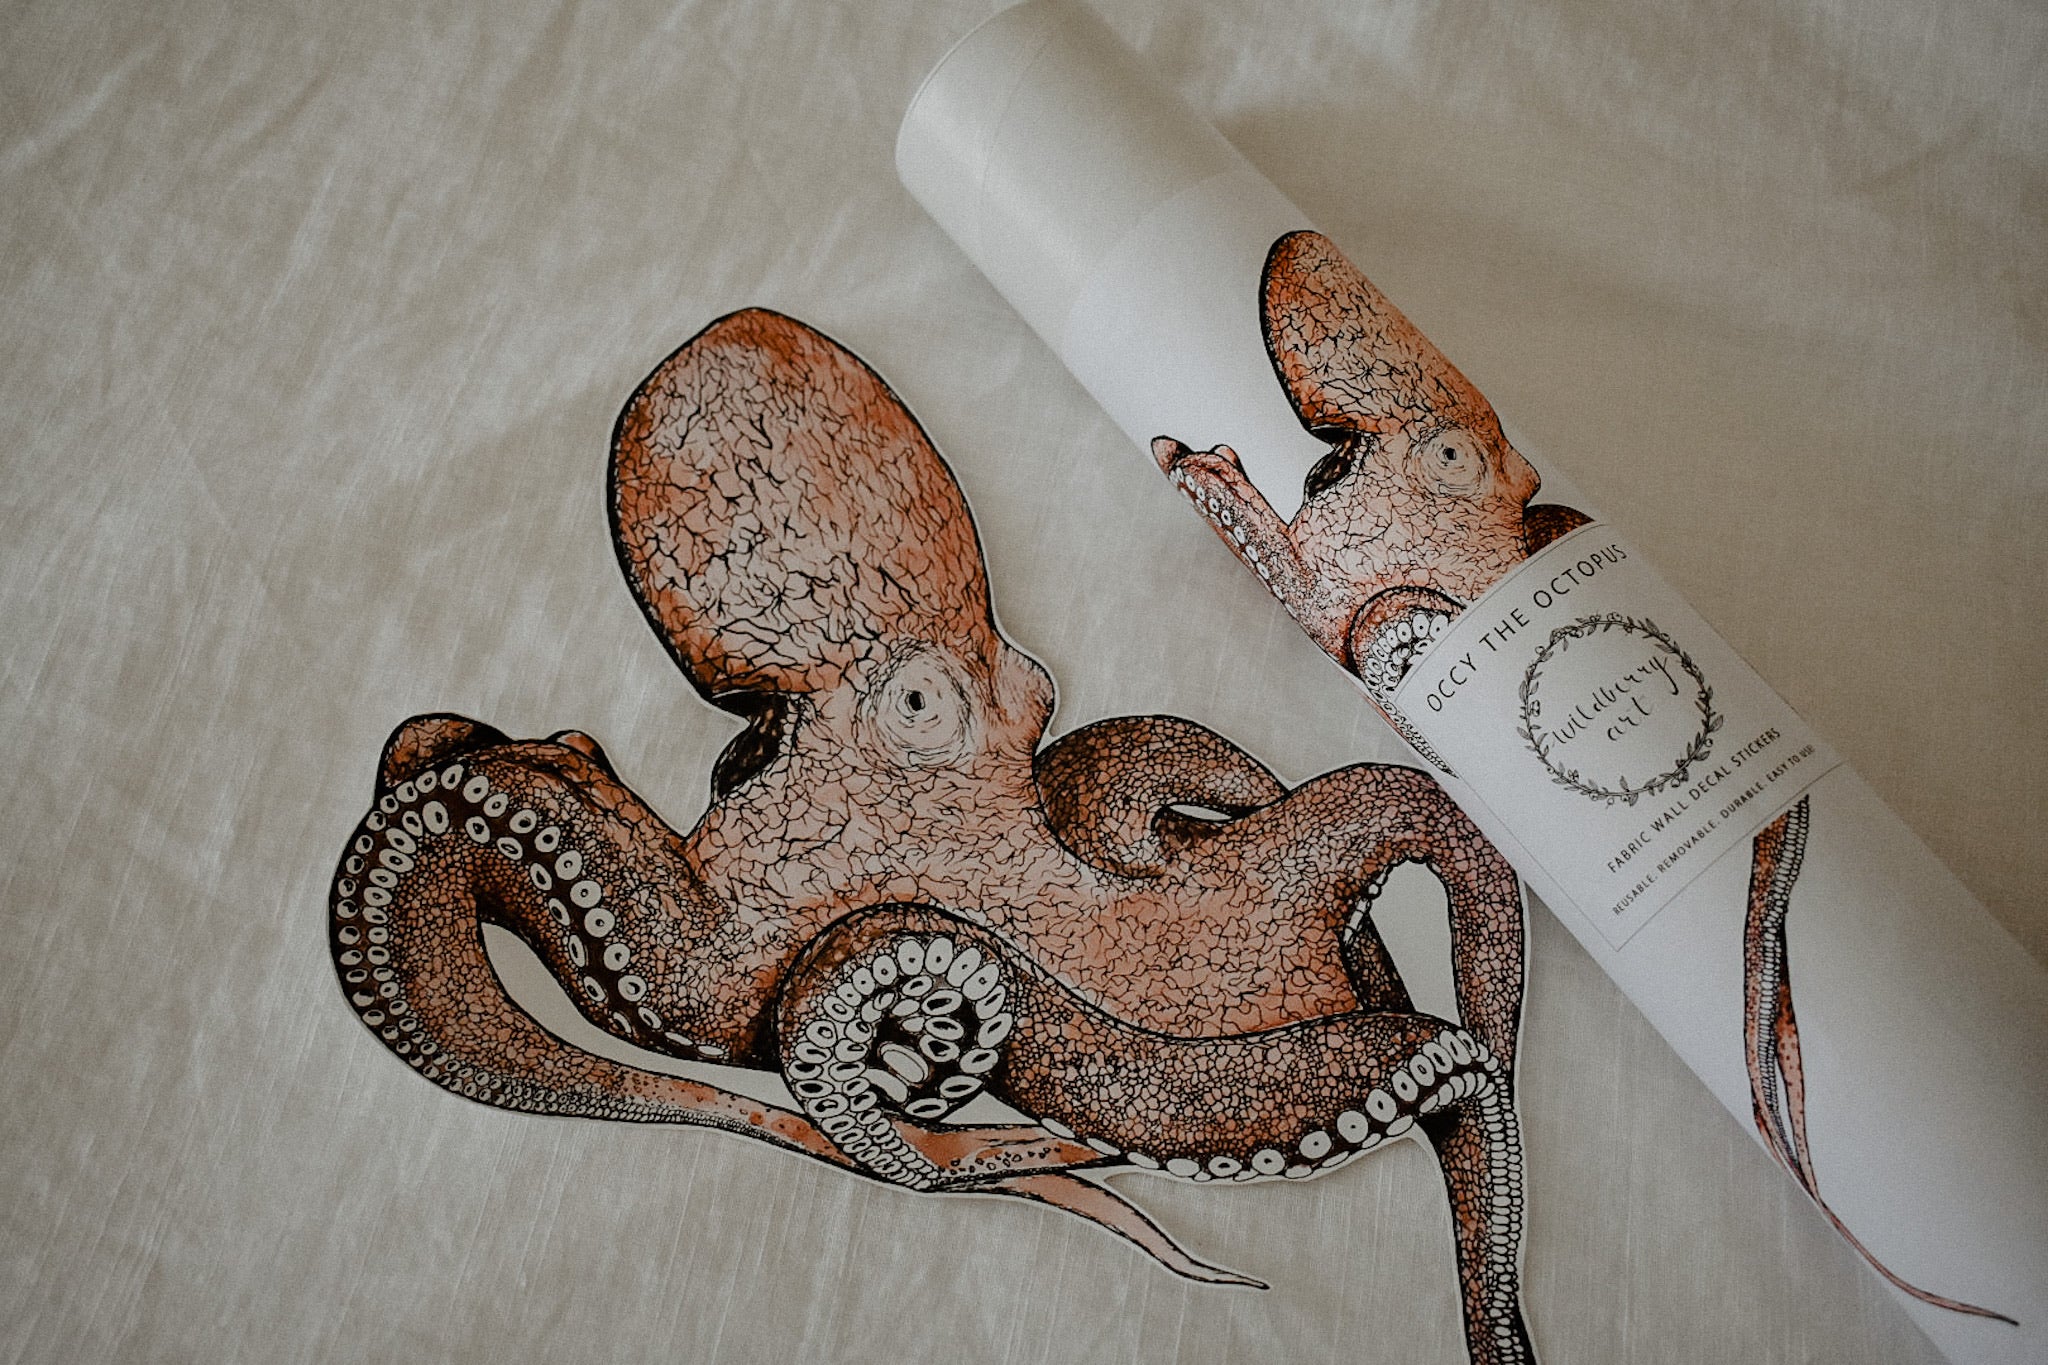 Occy the Octopus Fabric Wall Decal - Separate